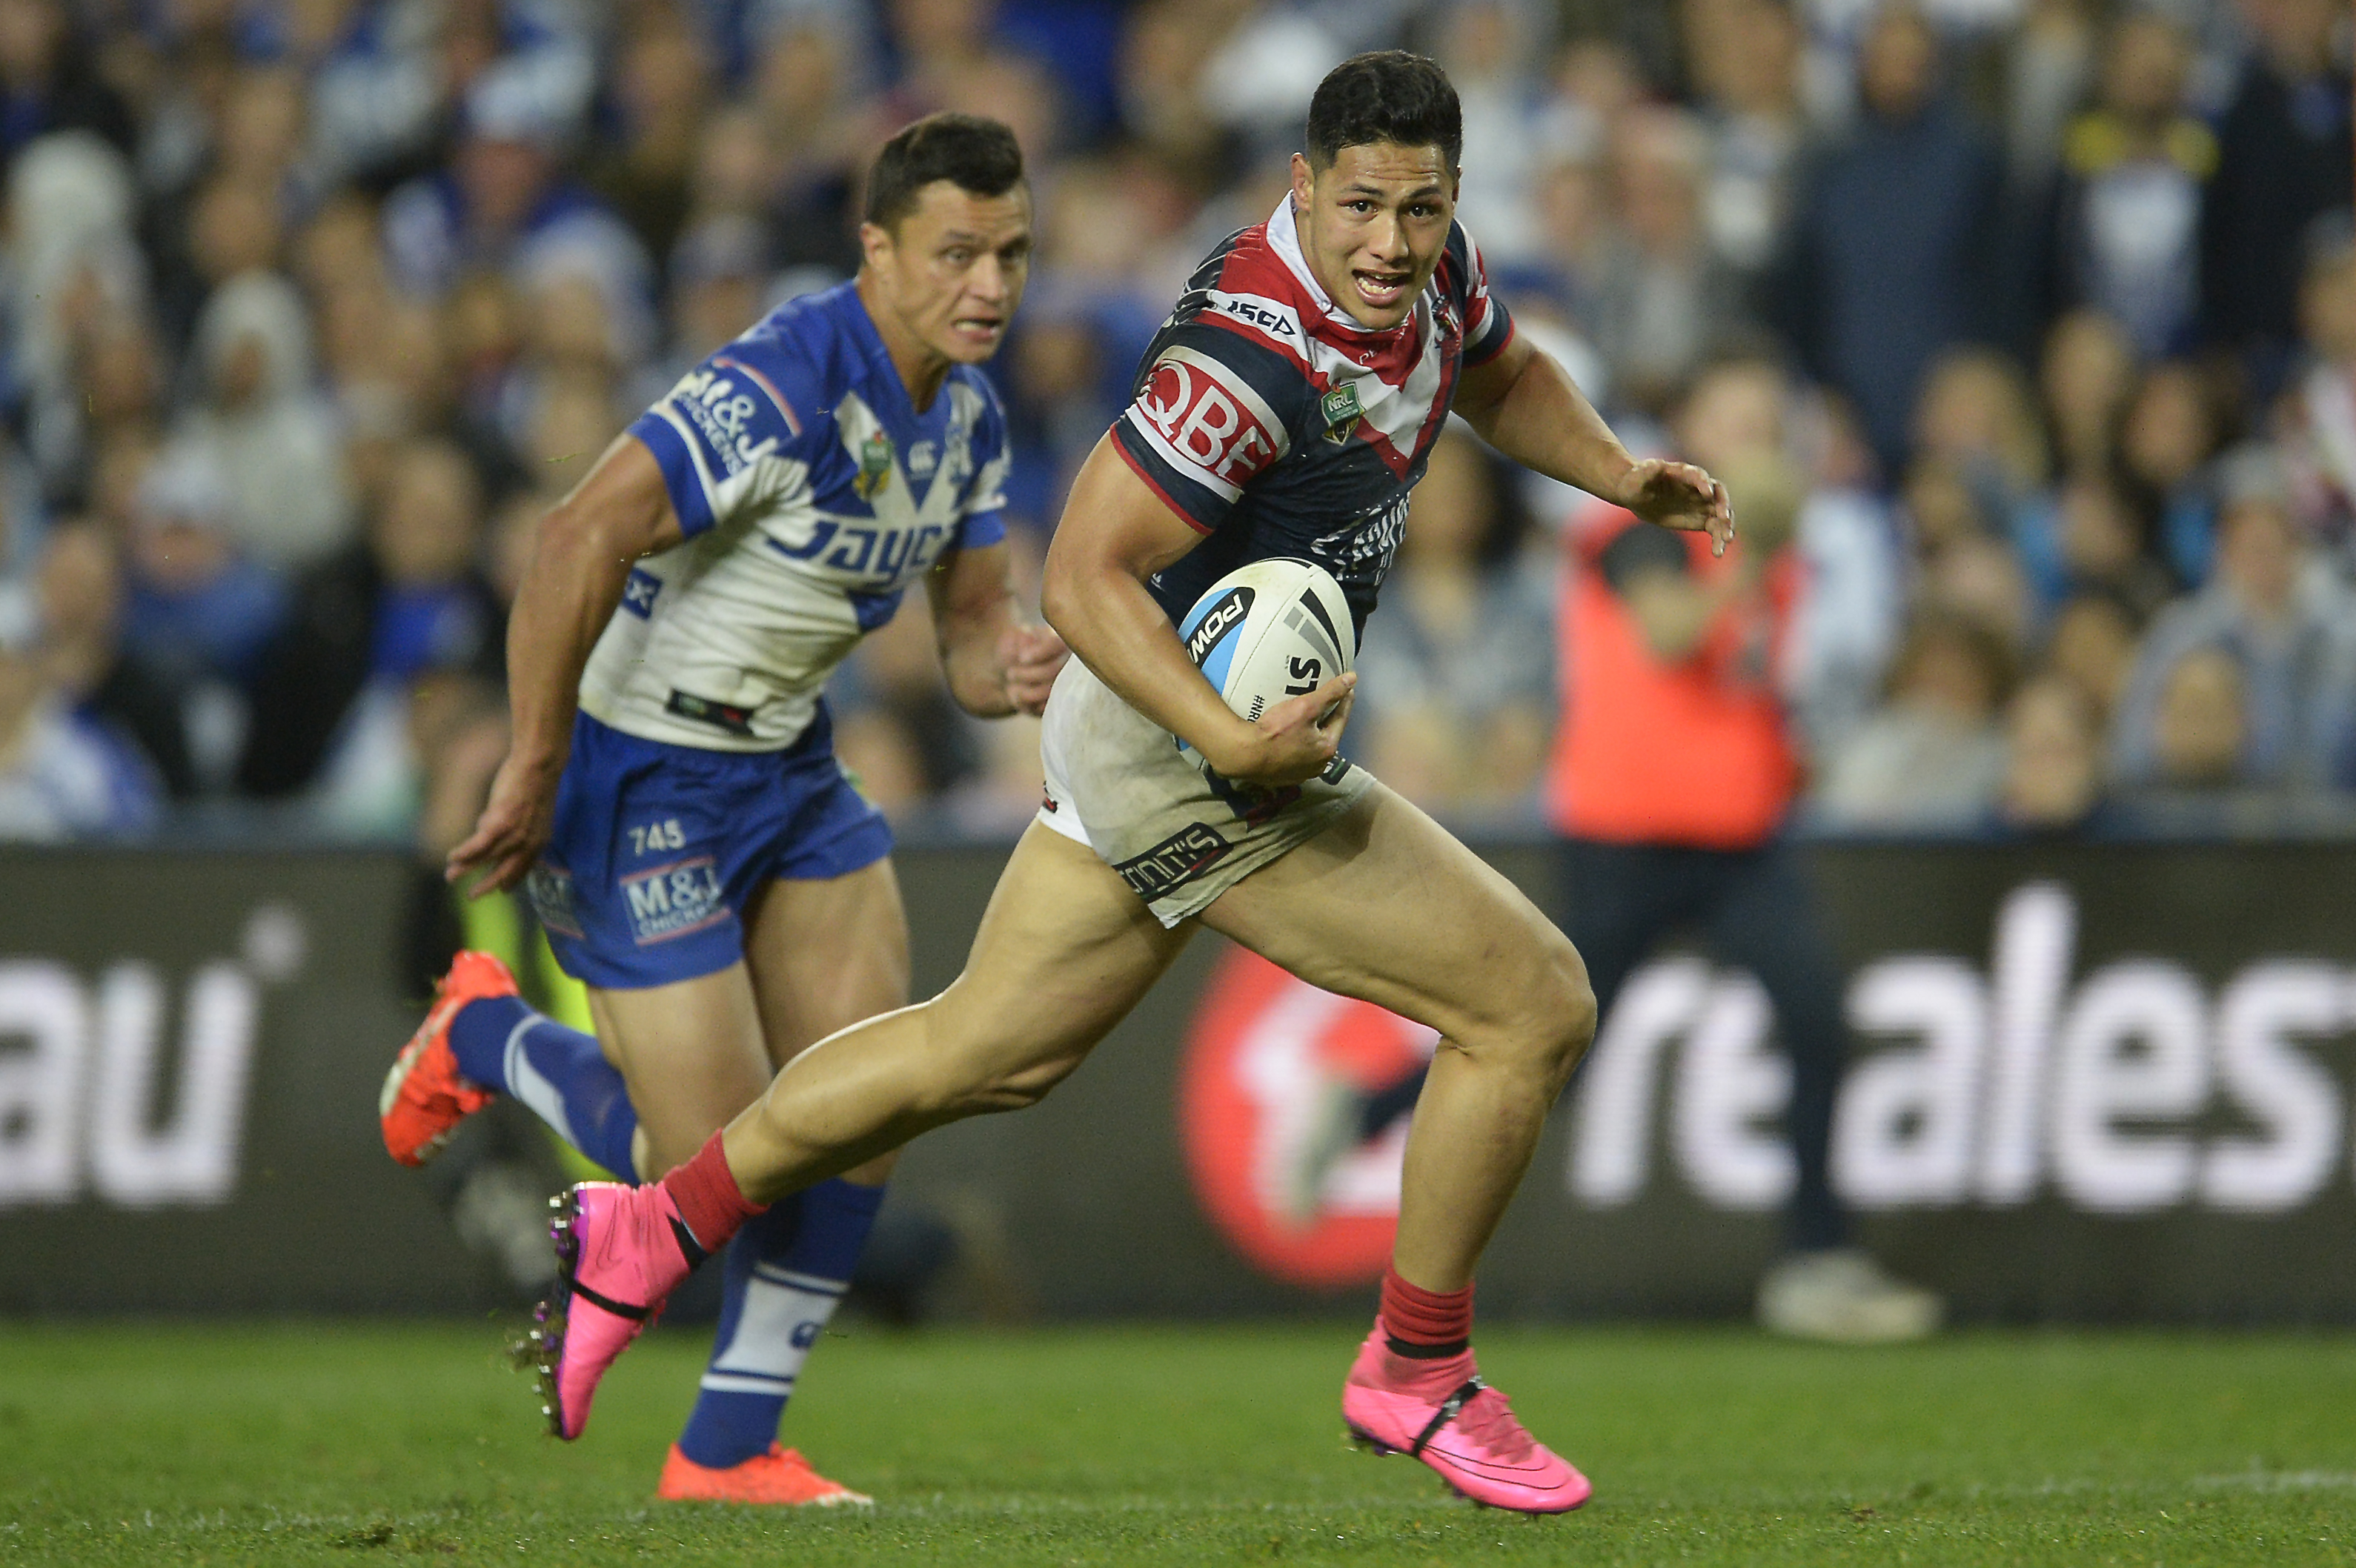 Roger Tuivasa-Sheck of the Roosters makes a break to score a try.